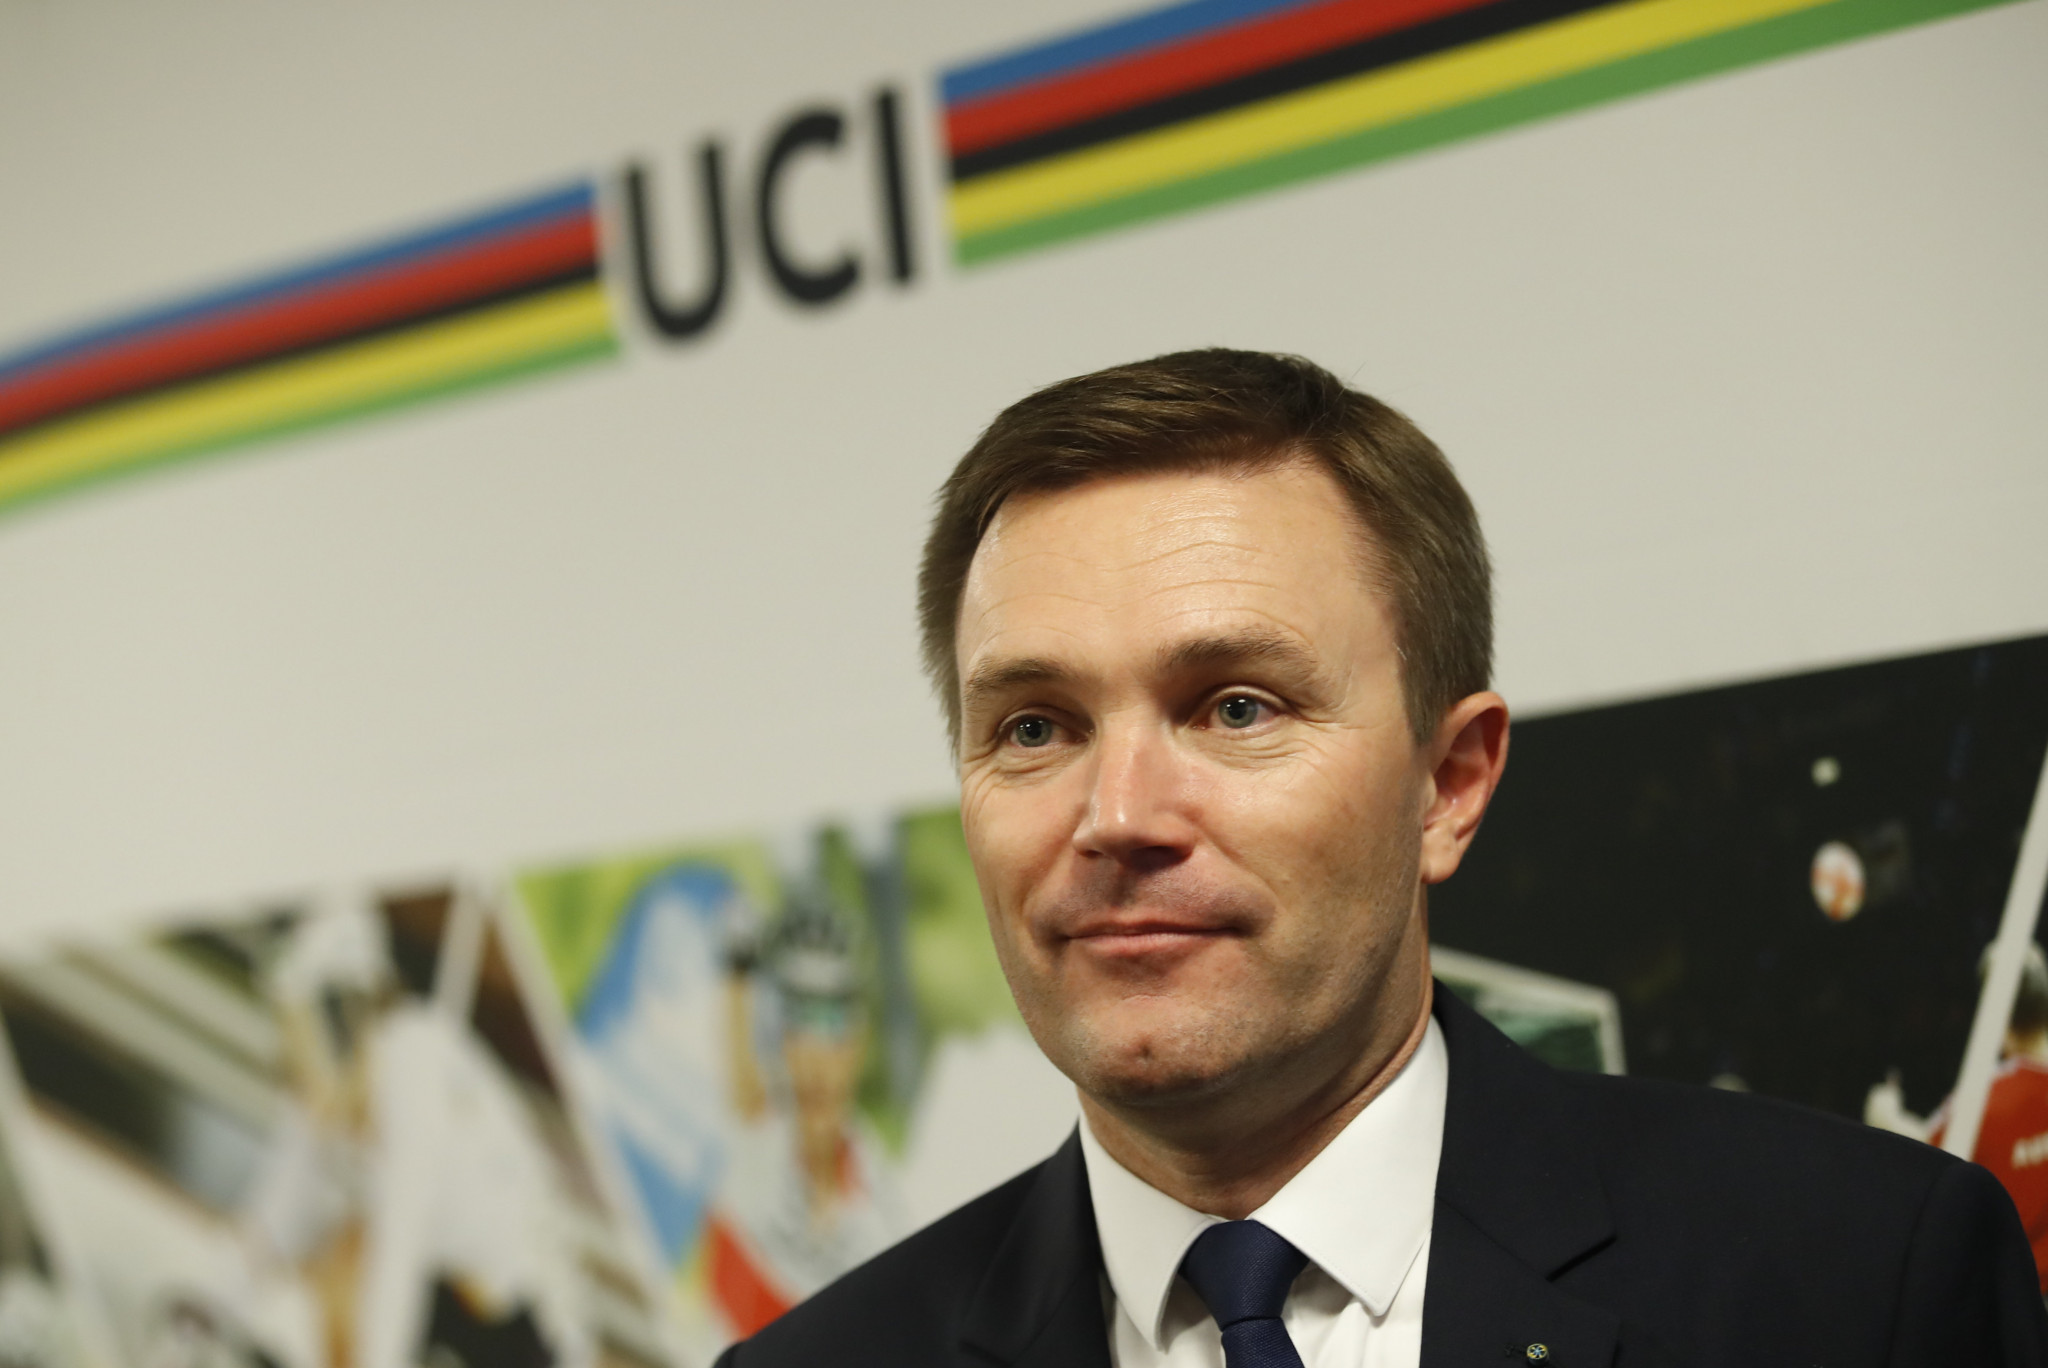 UCI President wants season not to extend "beyond what is reasonable"